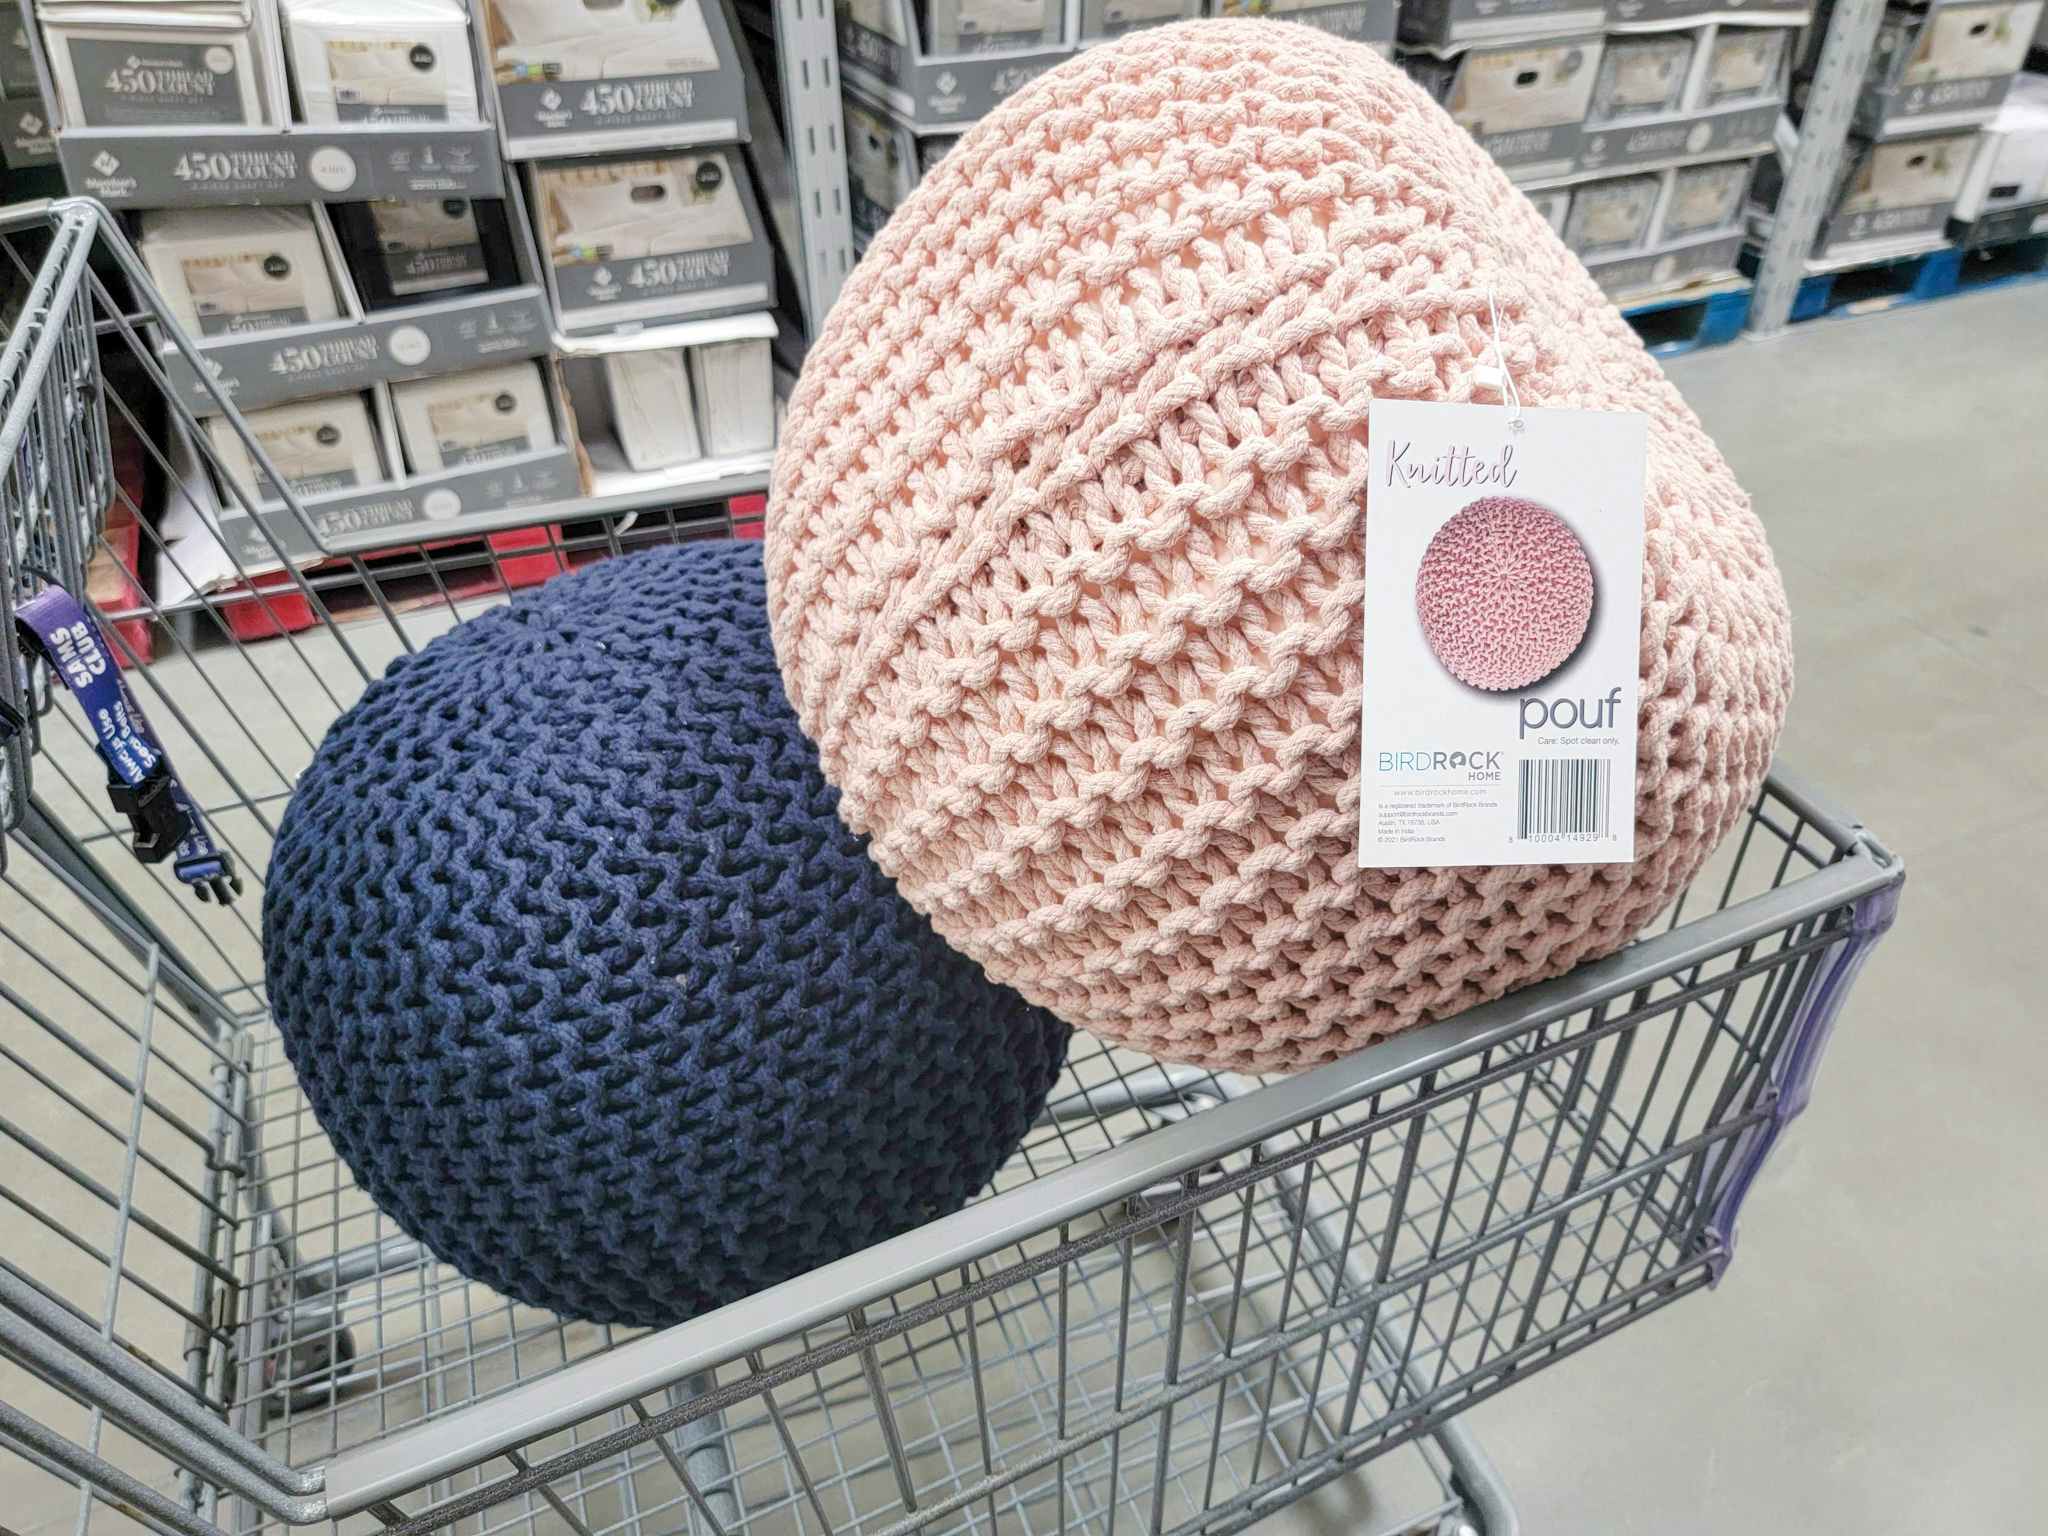 blue and pink knitted floor poufs in a cart